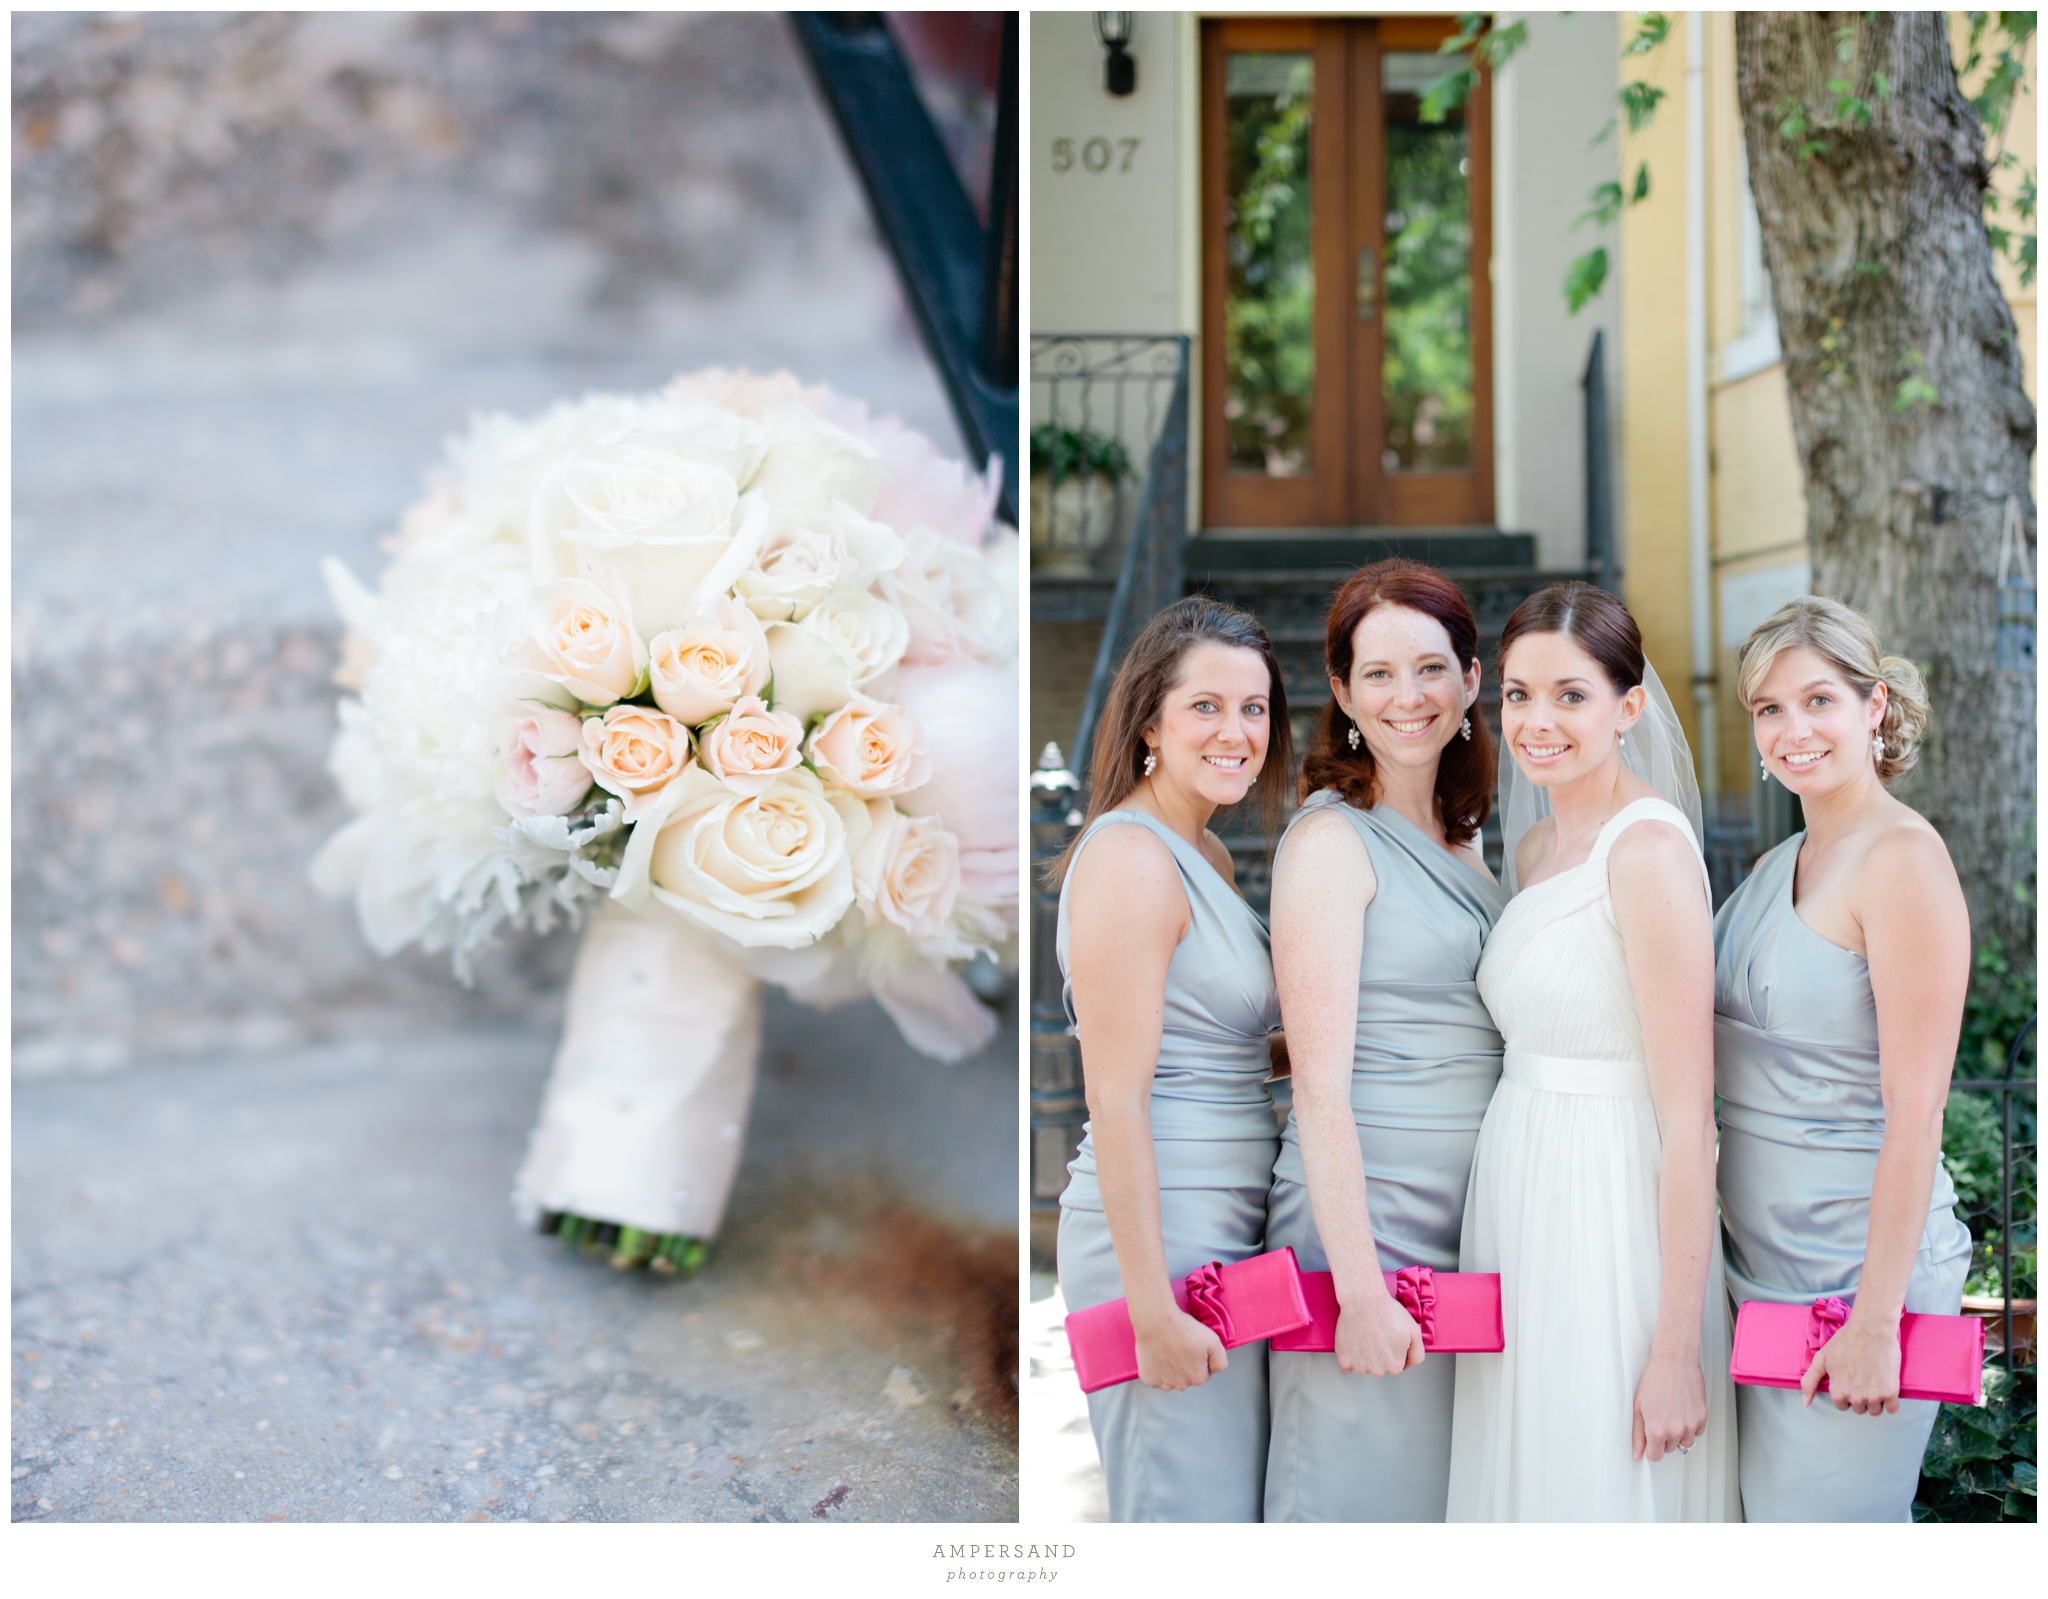 Soft grey and hot pink accents // Photos by Ampersand Photography